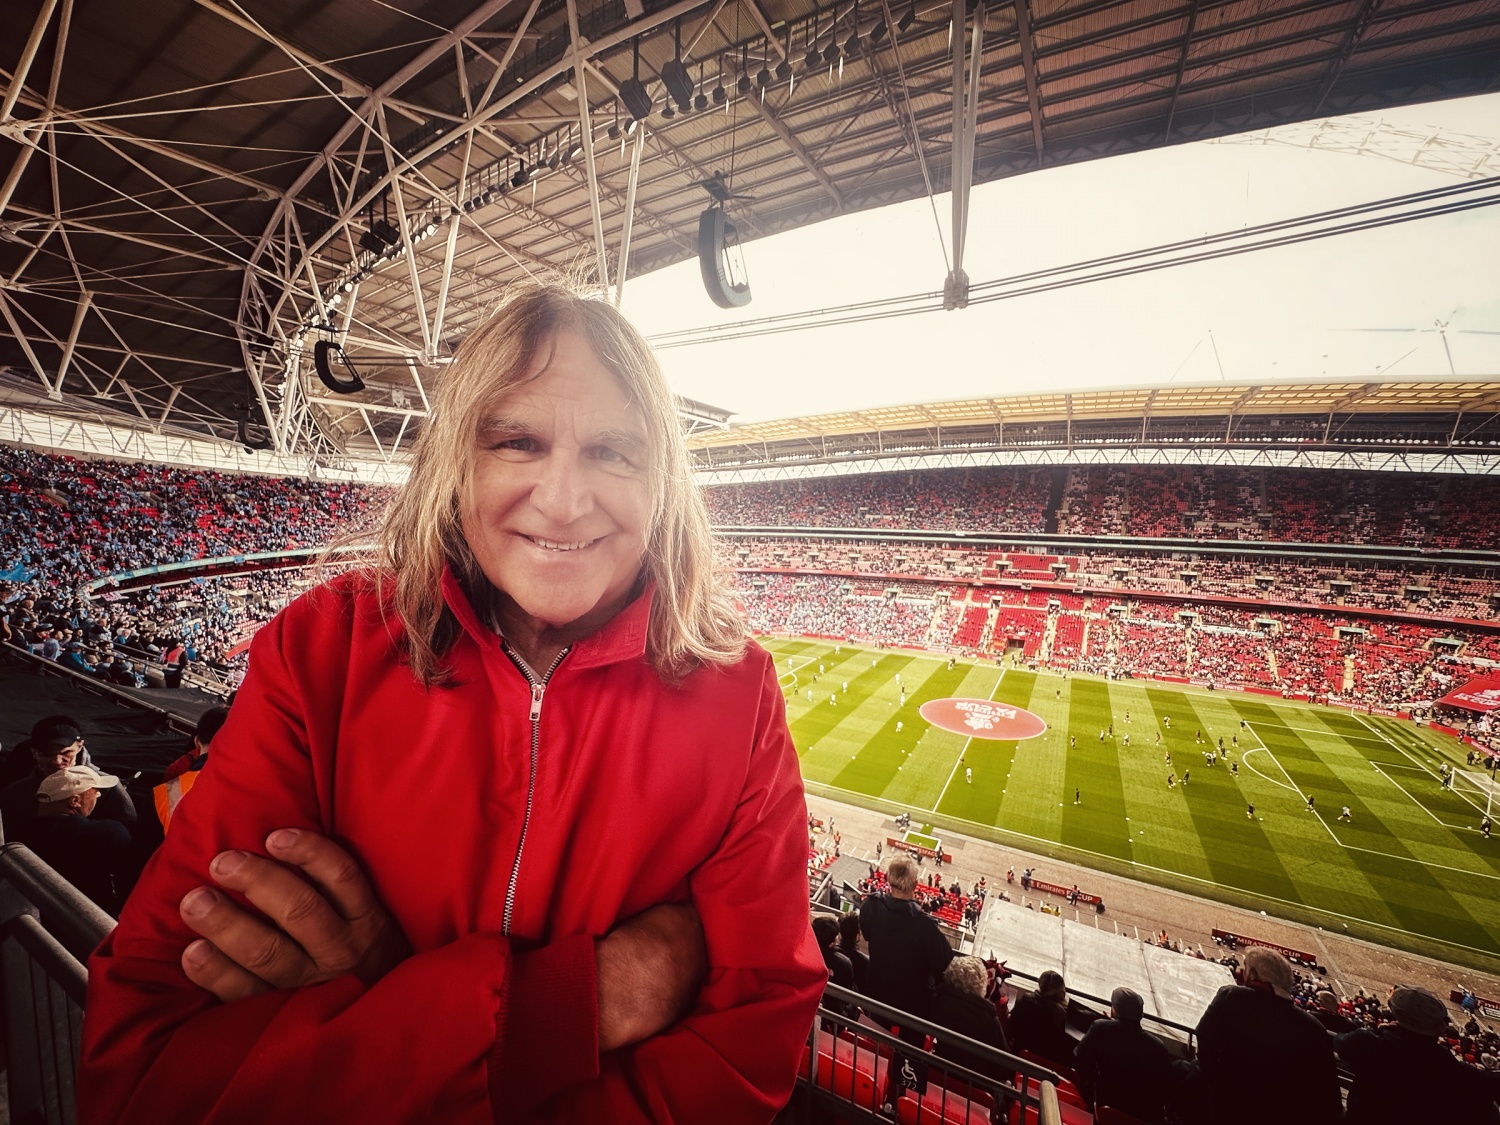 Mike Peters of The Alarm at Manchester United v Coventry City FA CUP Semi Final at London's Wembley Stadium on April 21.